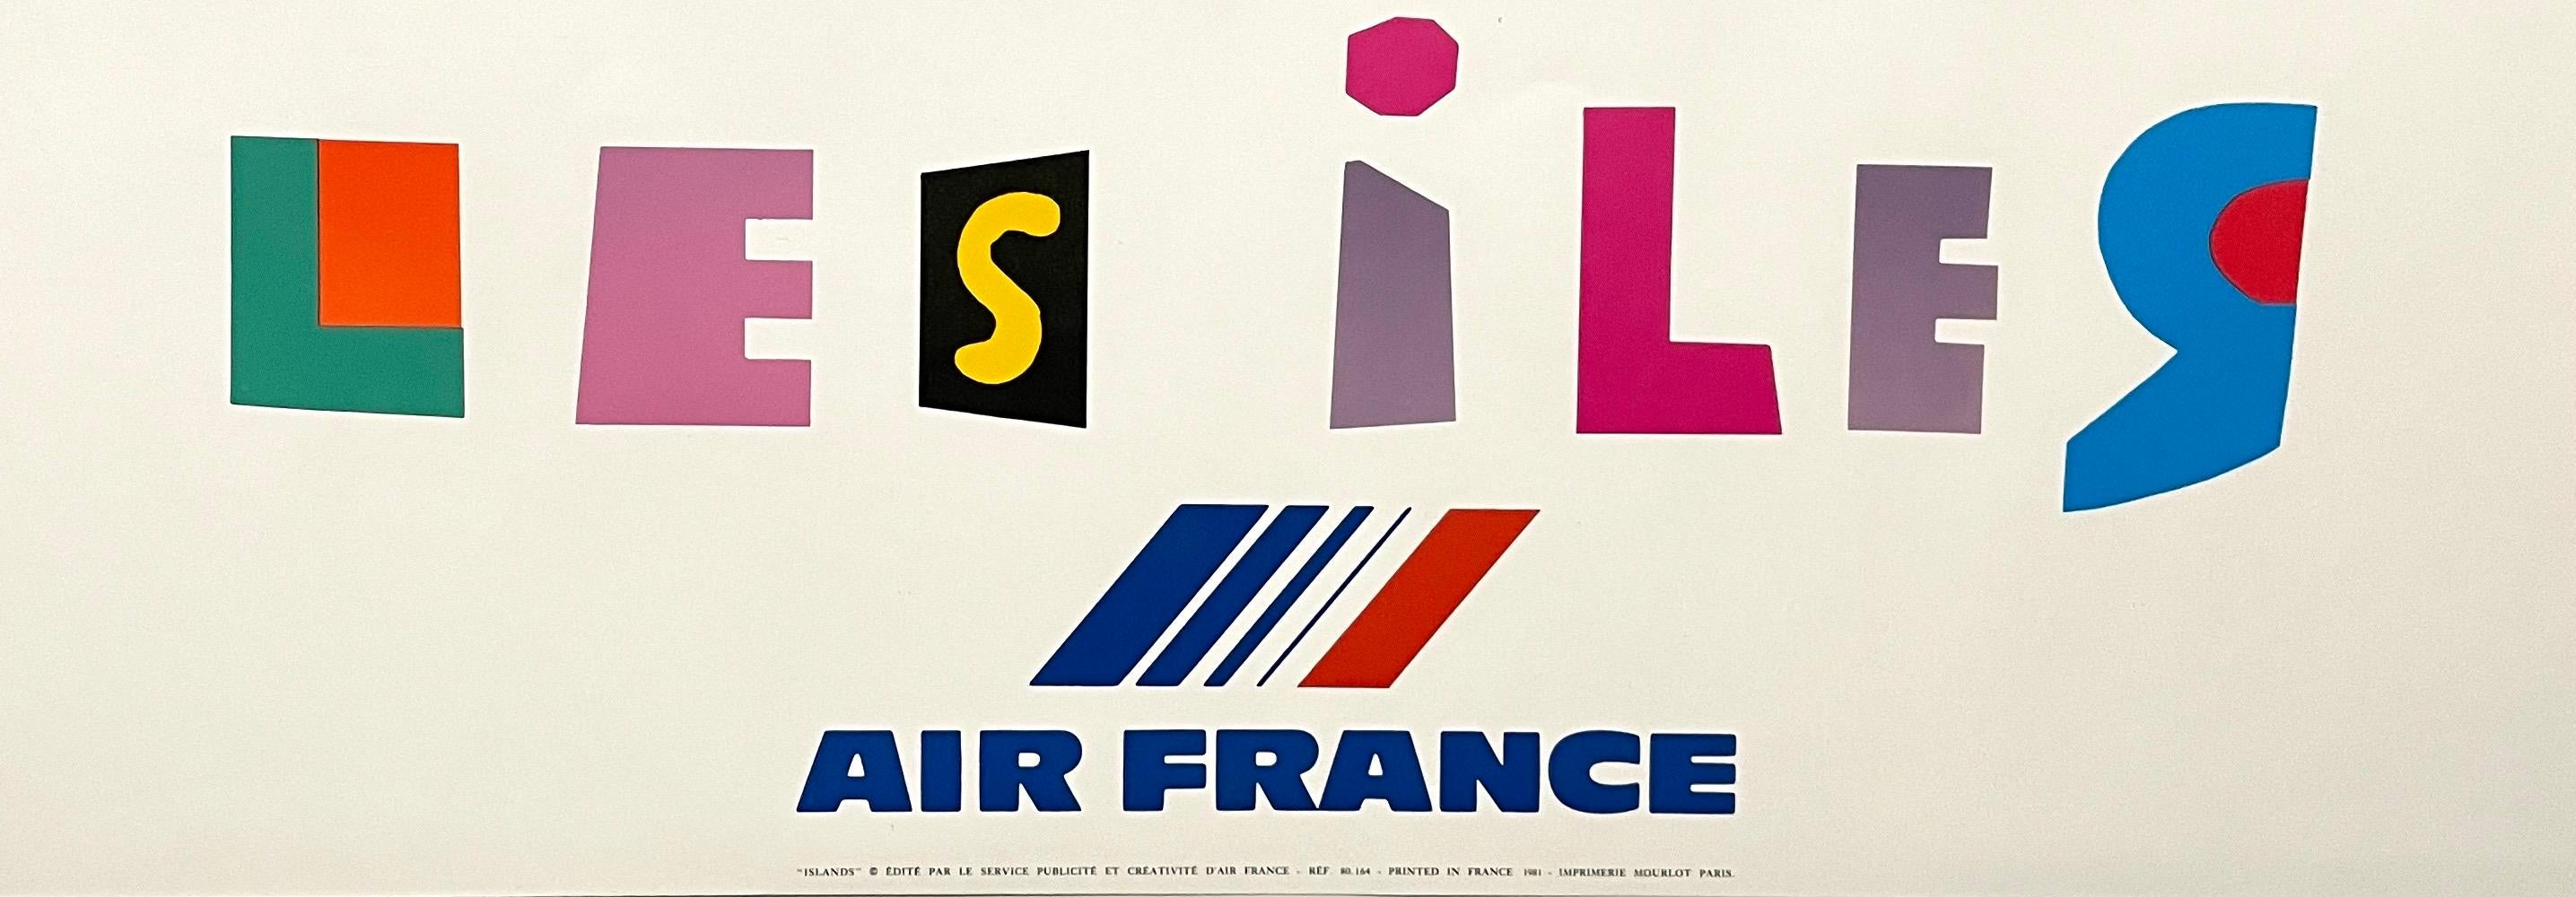 French Modernist Mourlot Lithograph Vintage Air France Poster Roger Bezombes  For Sale 3